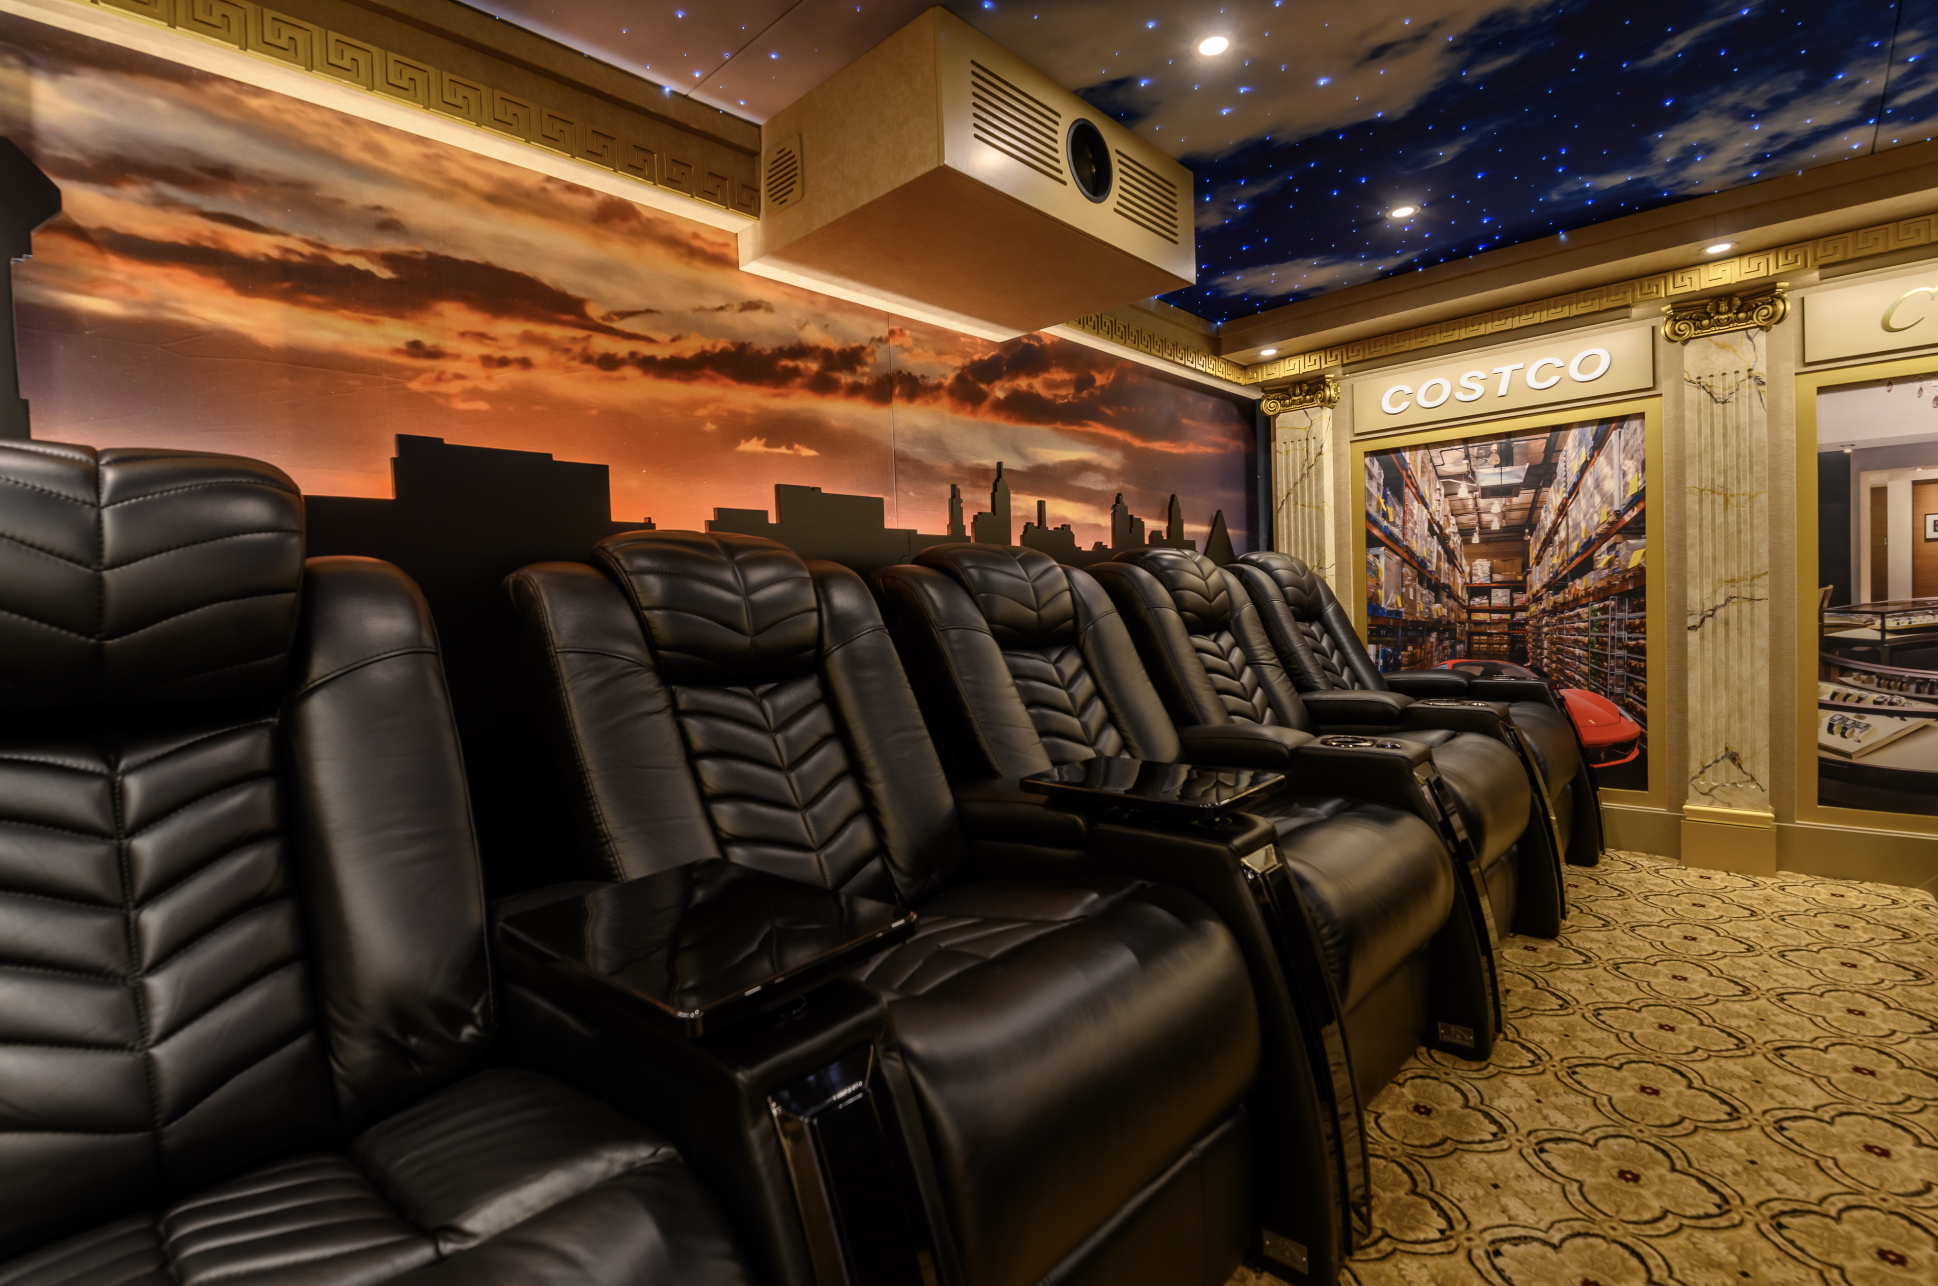 Las Vegas Theme Home Theater by Digital Installers South Bay 1 Star Ceilings